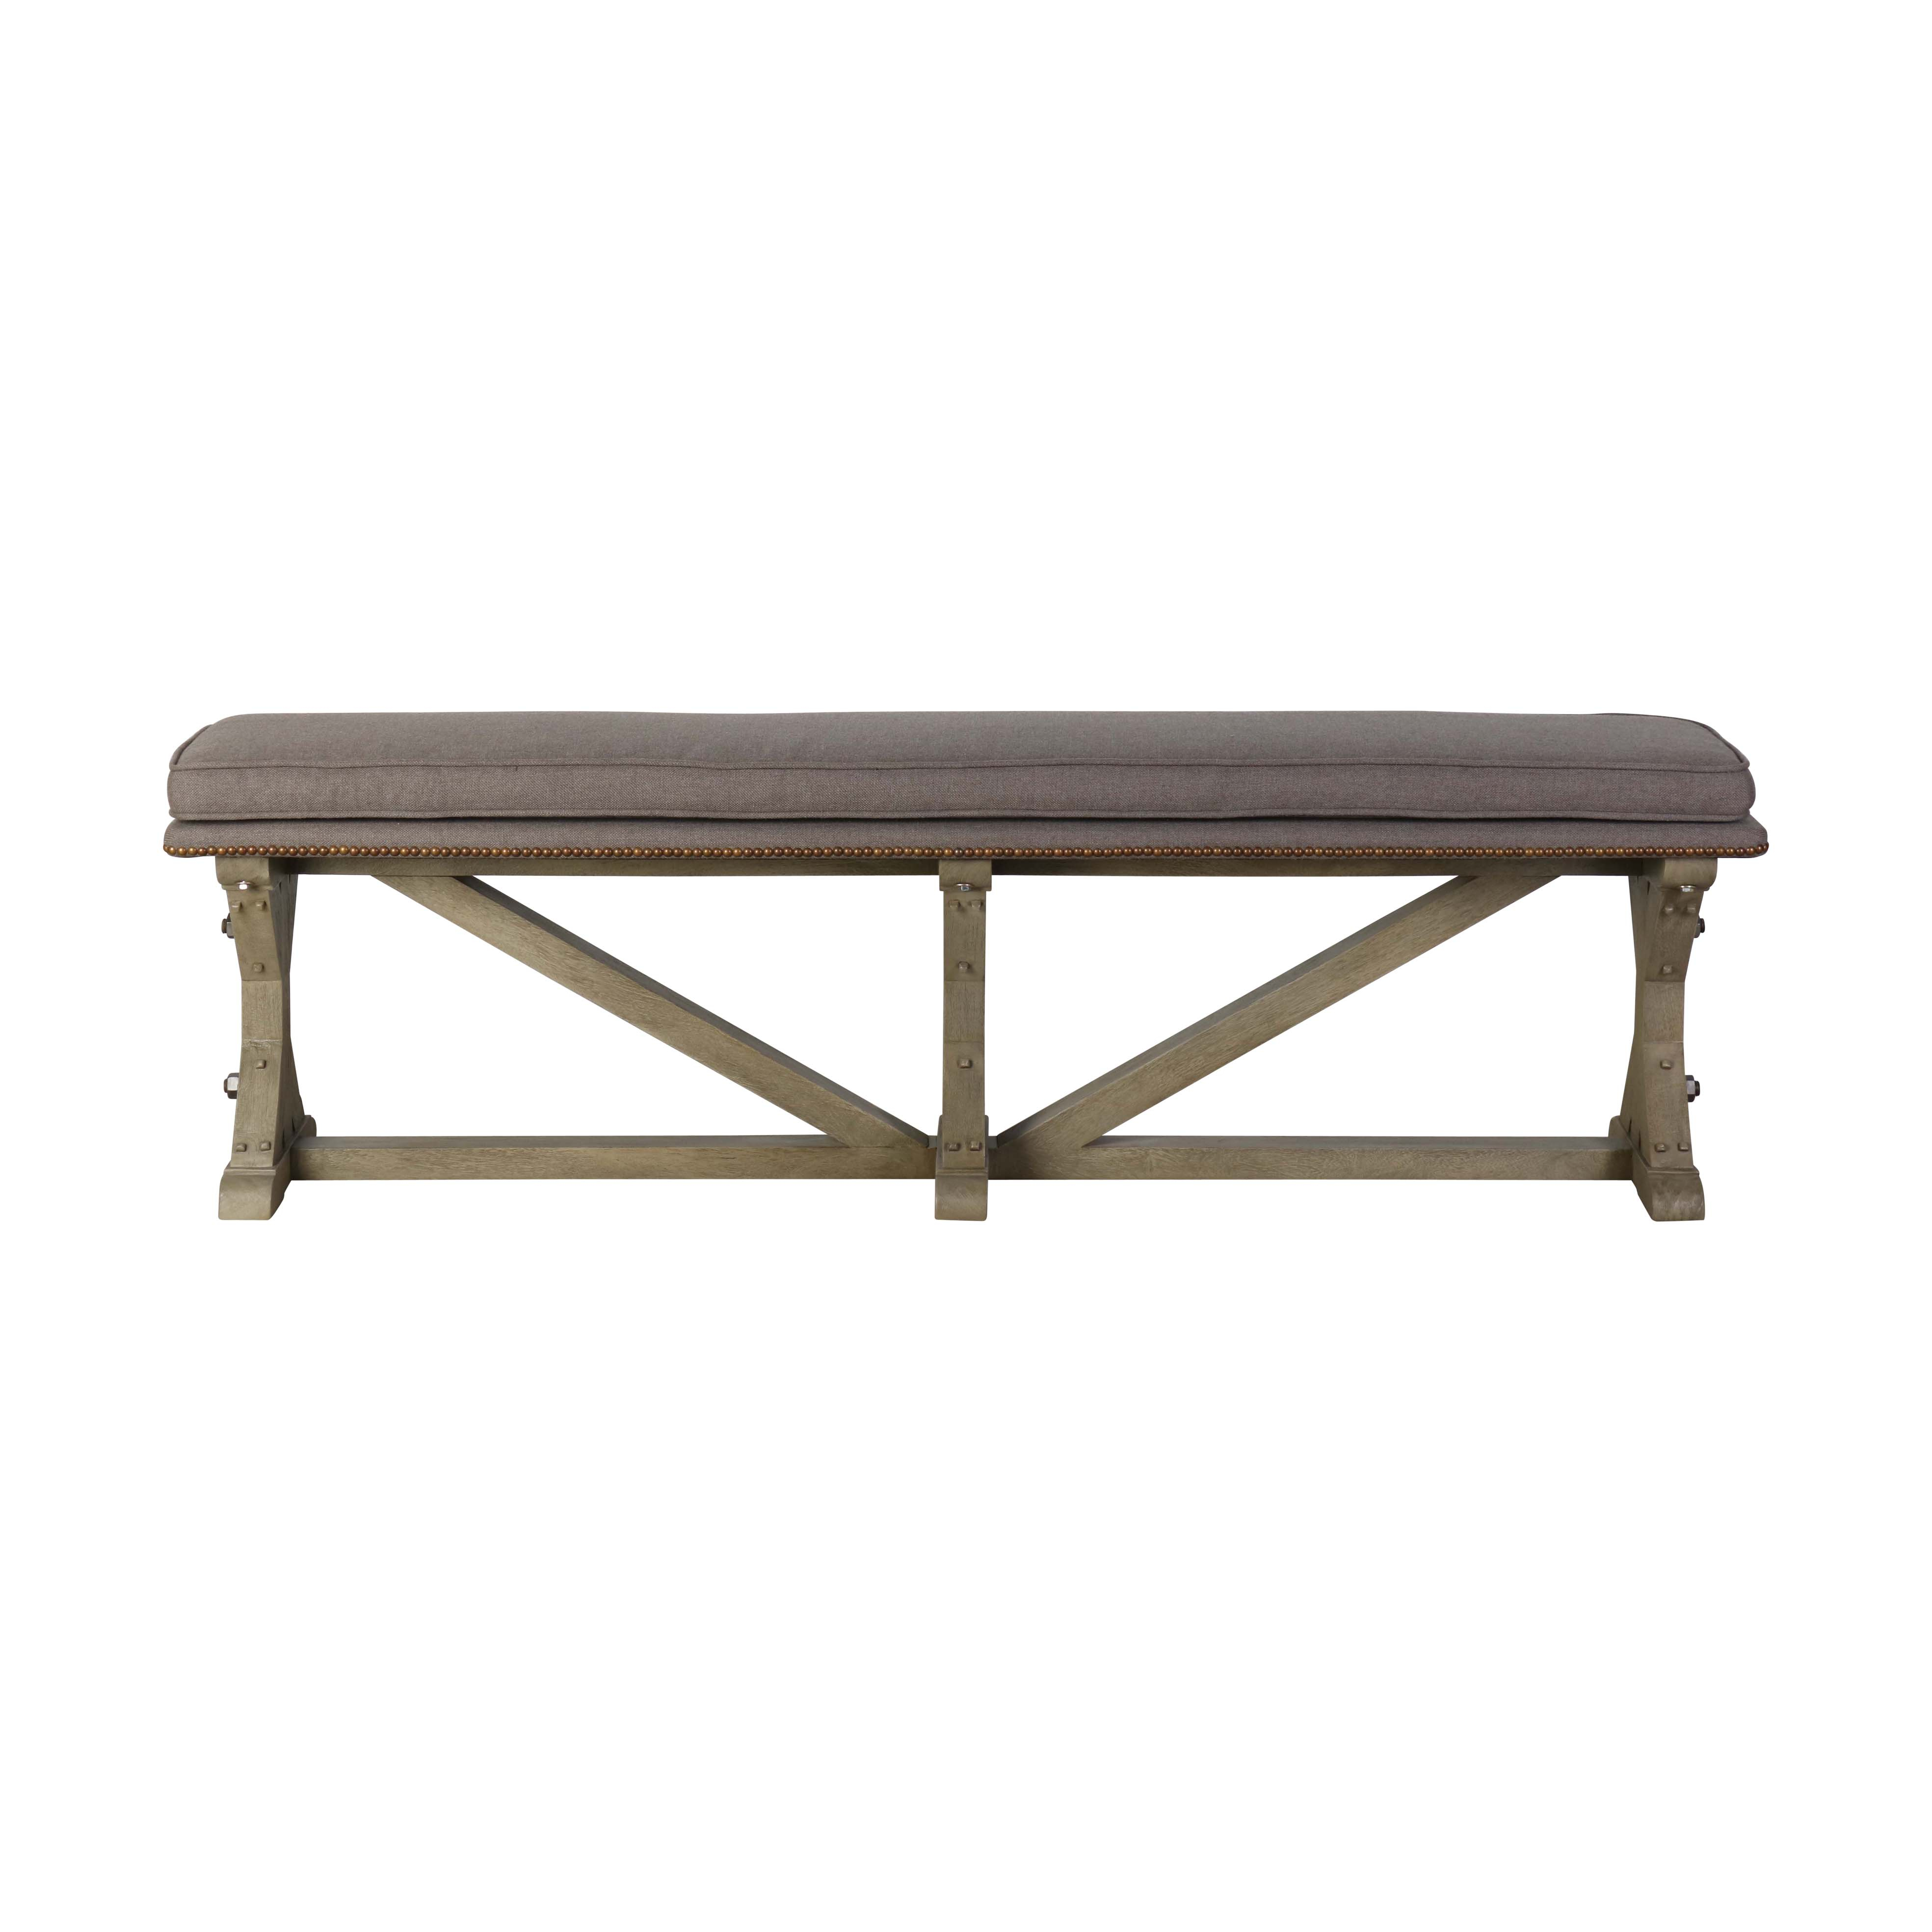 wooden bench with upholstered seat